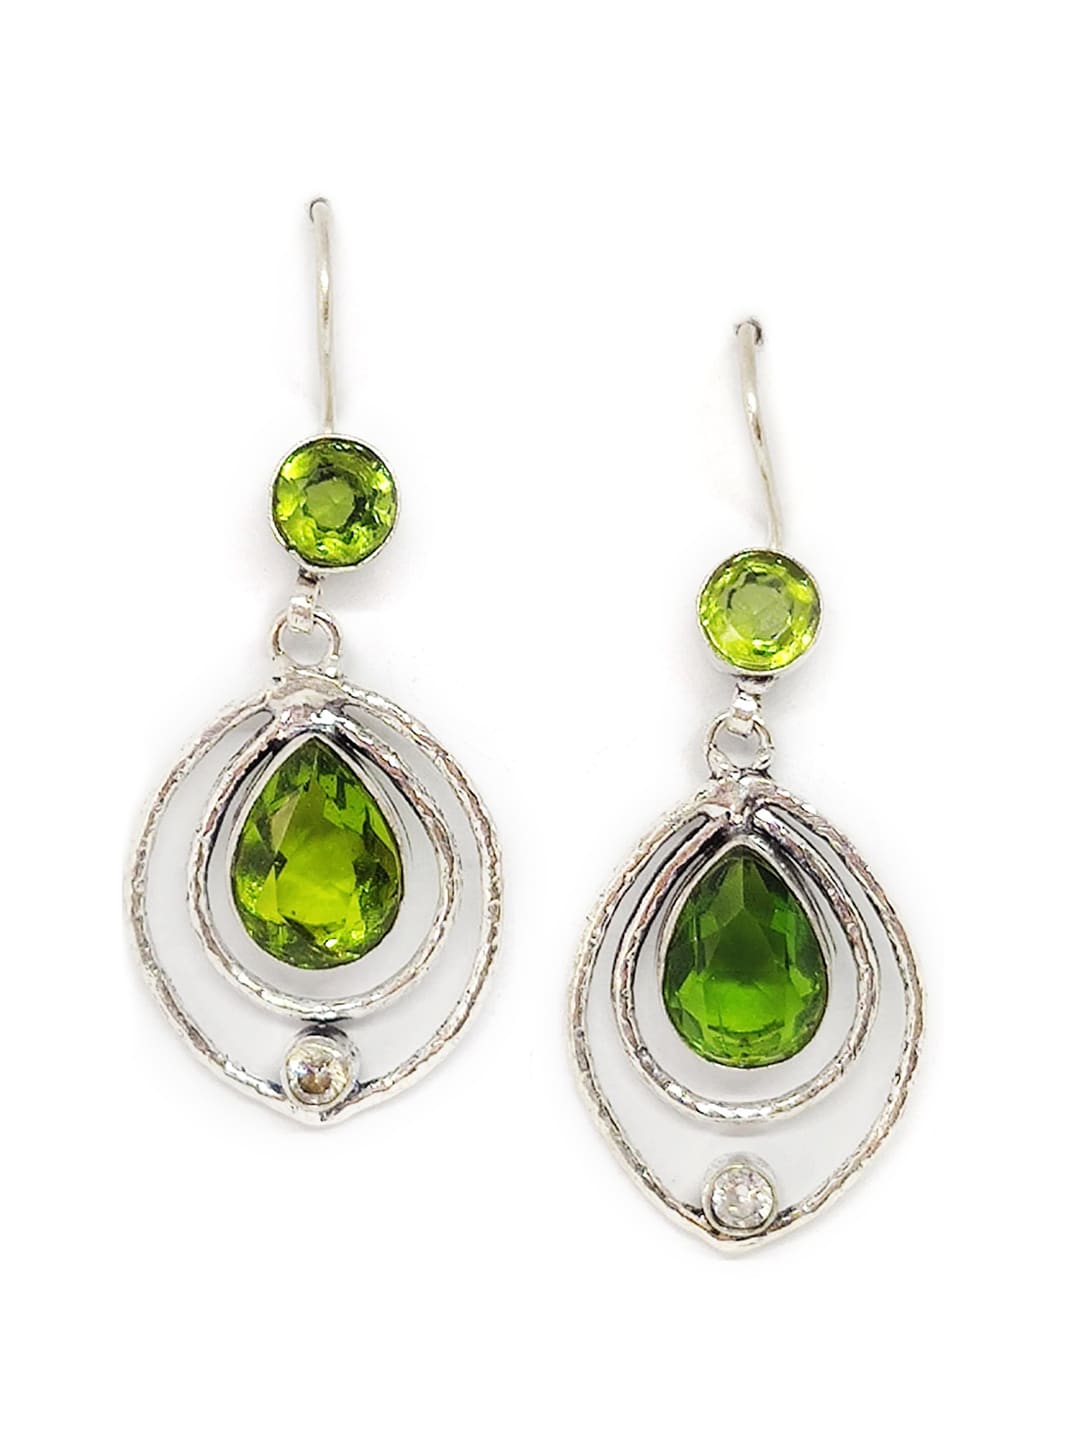 EL REGALO Green Contemporary Drop Earrings - for Women and Girls
Style ID: 16770270